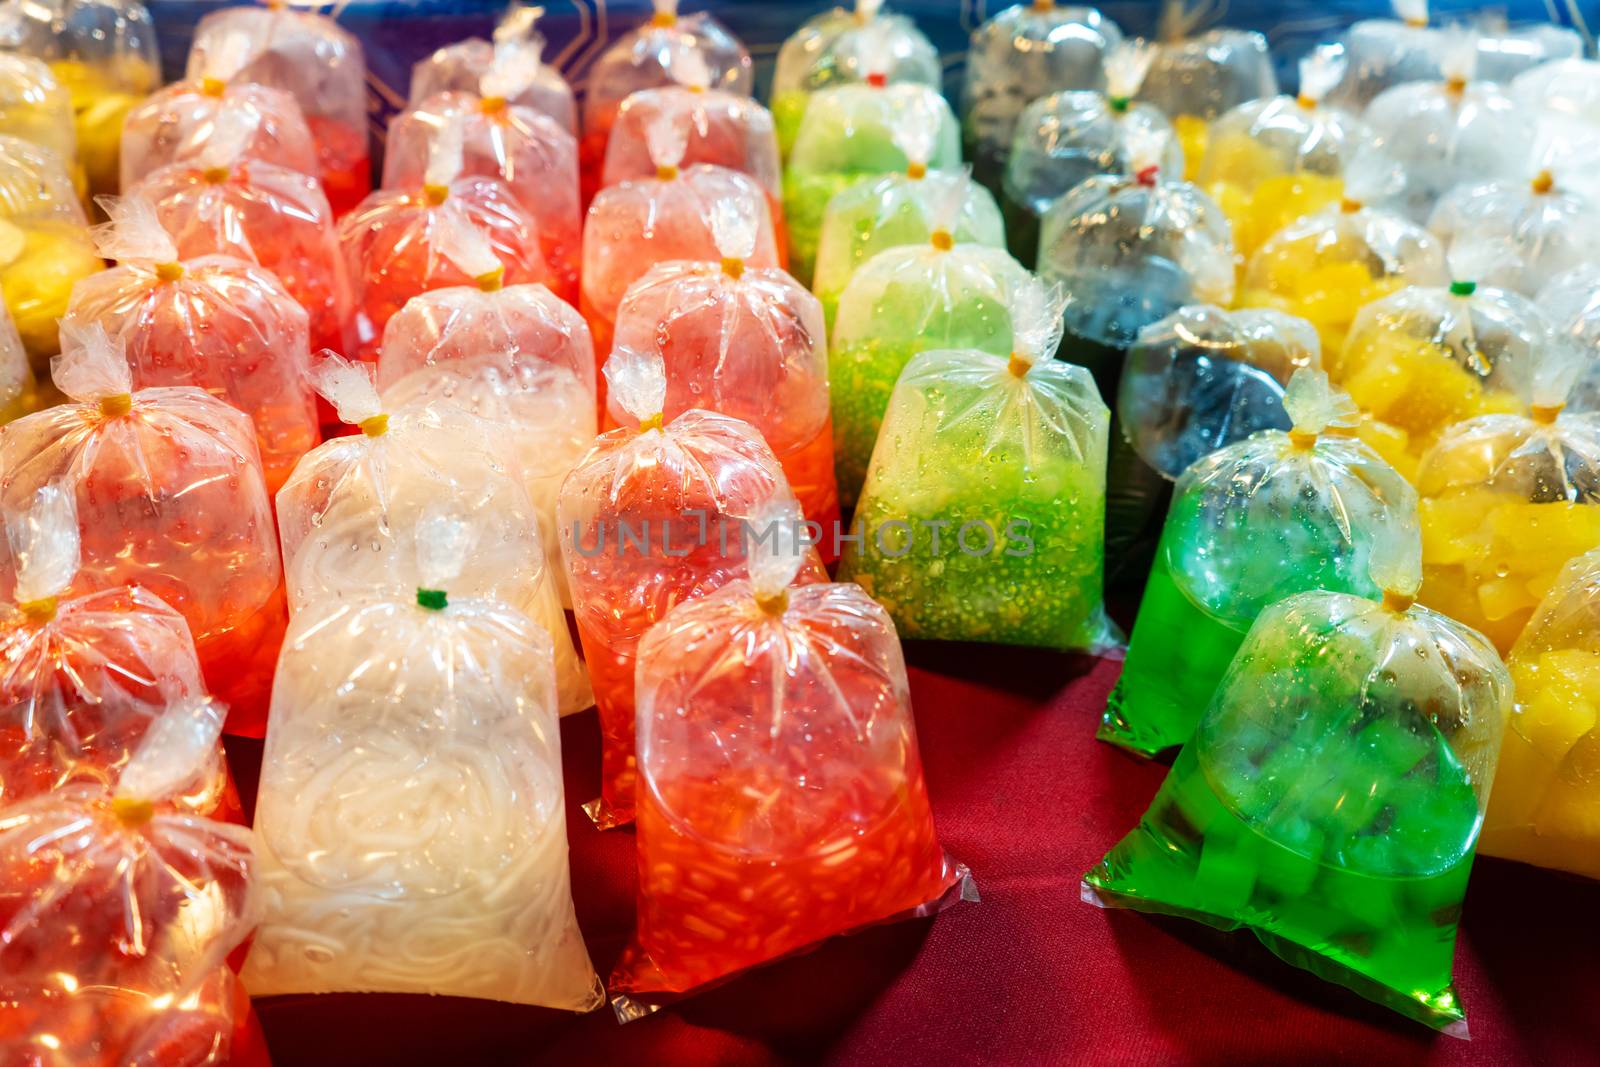 Colored desserts in plastic bags at a street food market in Asia. Unusual Asian food. by Try_my_best